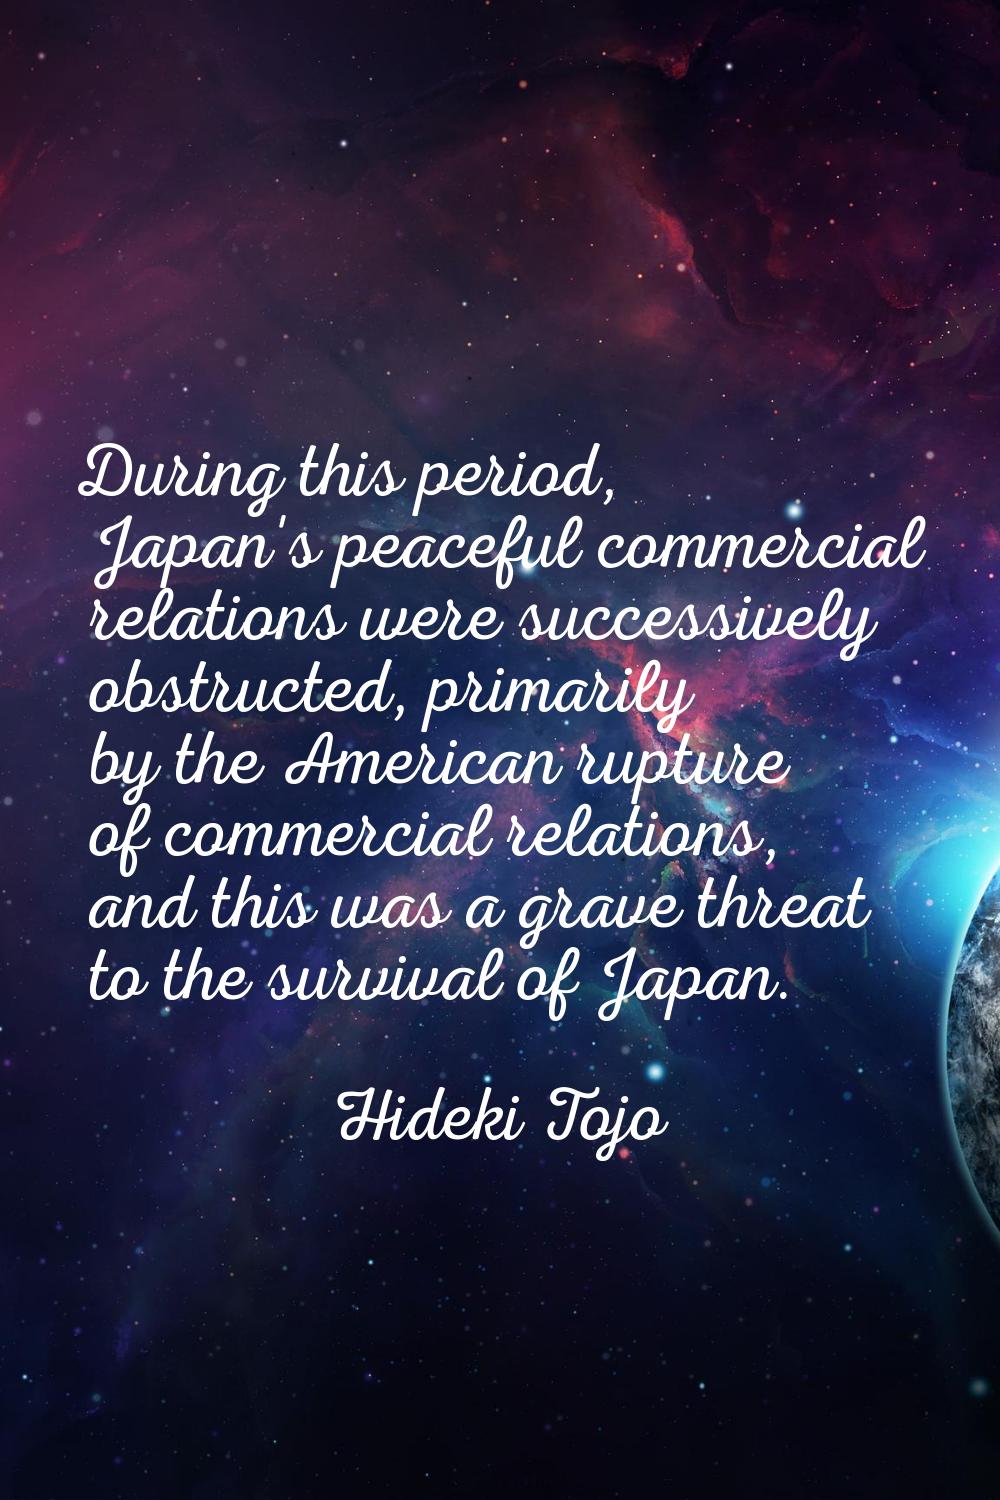 During this period, Japan's peaceful commercial relations were successively obstructed, primarily b